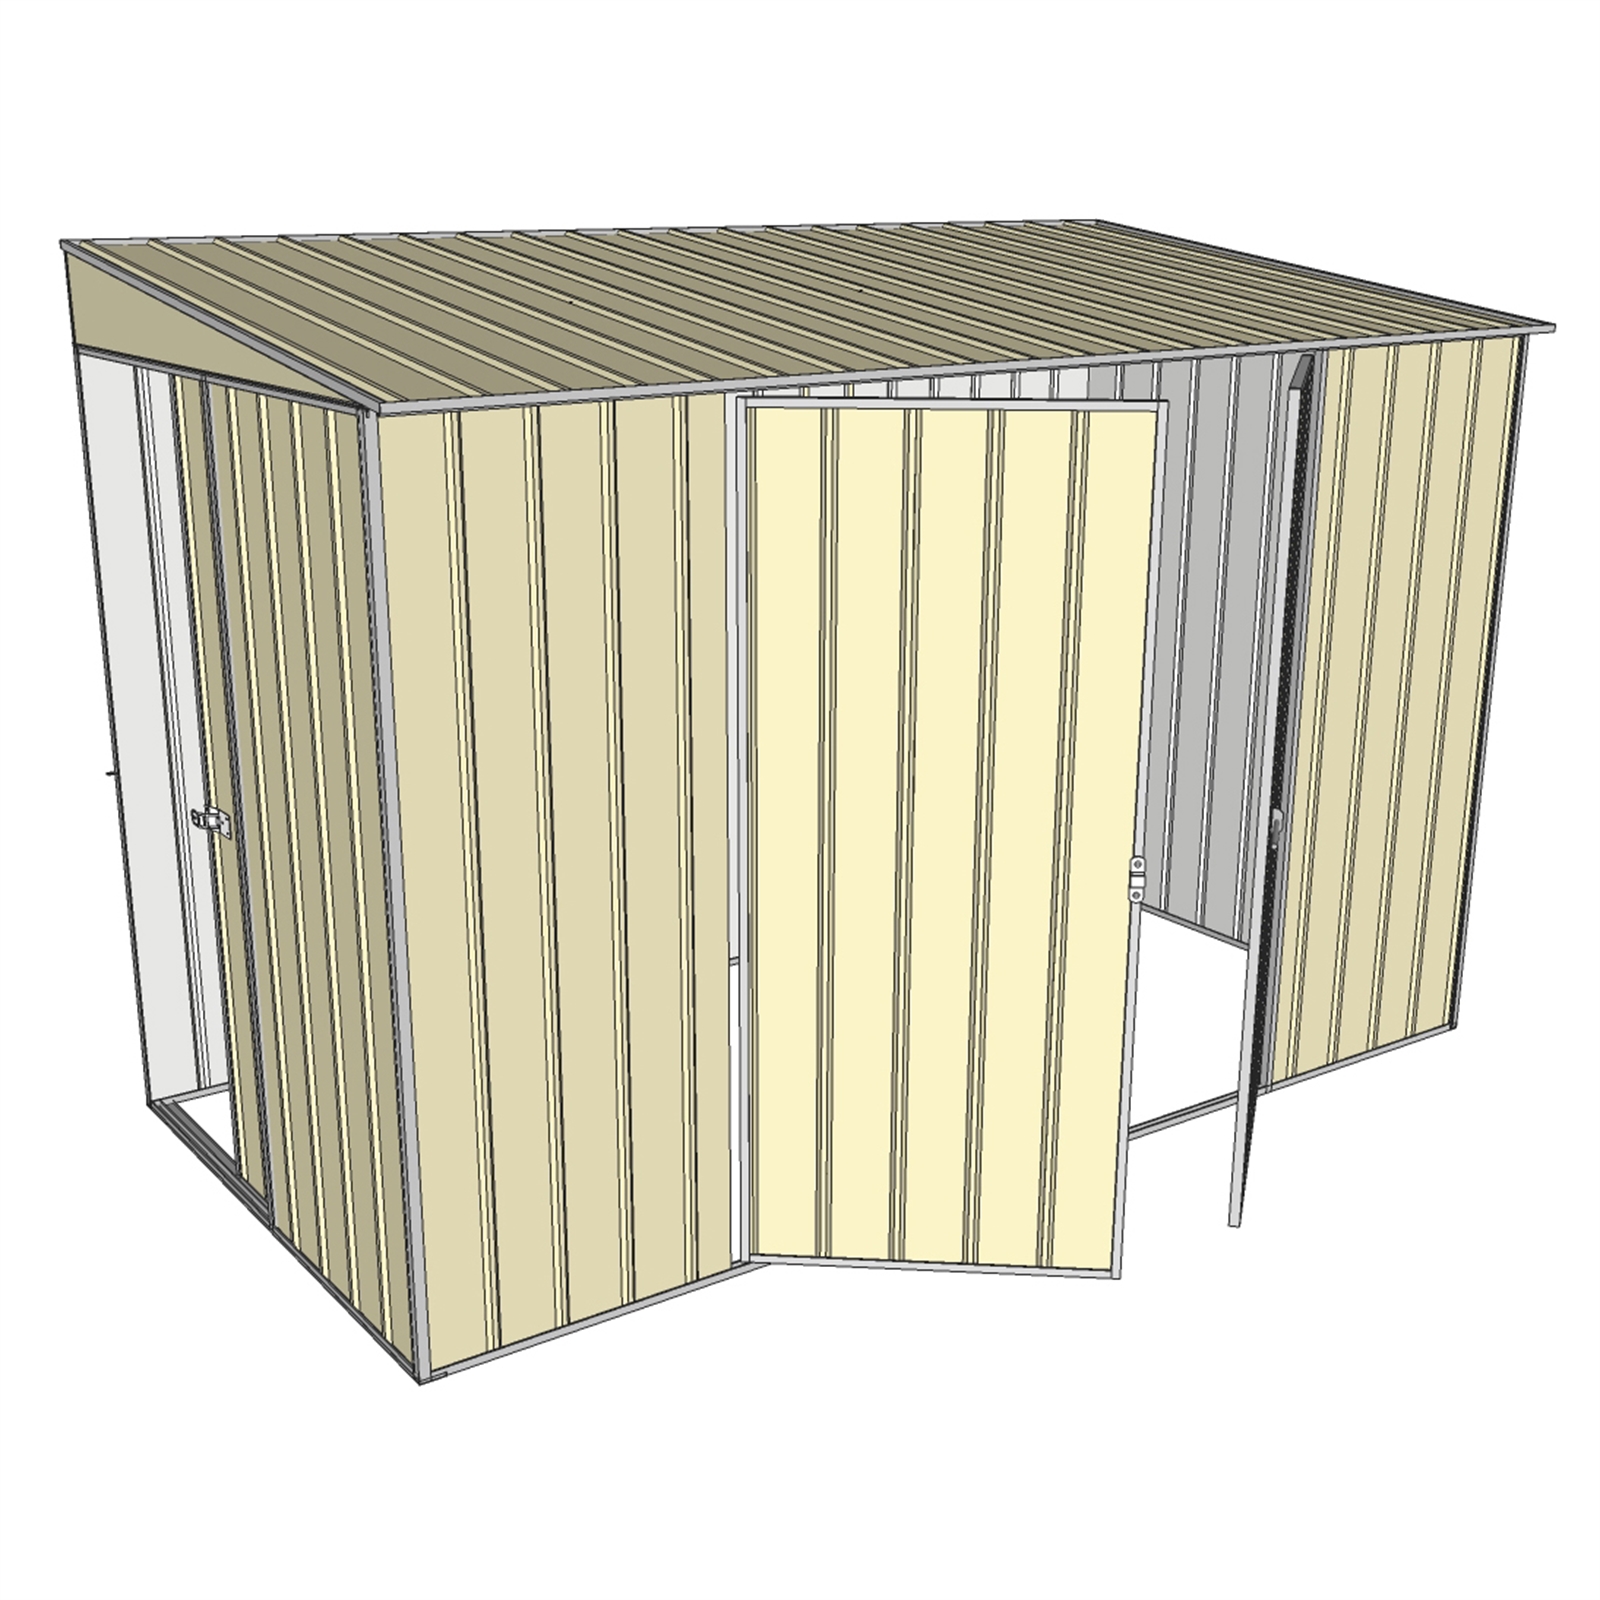 Build-a-Shed 1.5 x 3.0m Cream Skillion Single Sliding And Double Hinged Doors Narrow Shed